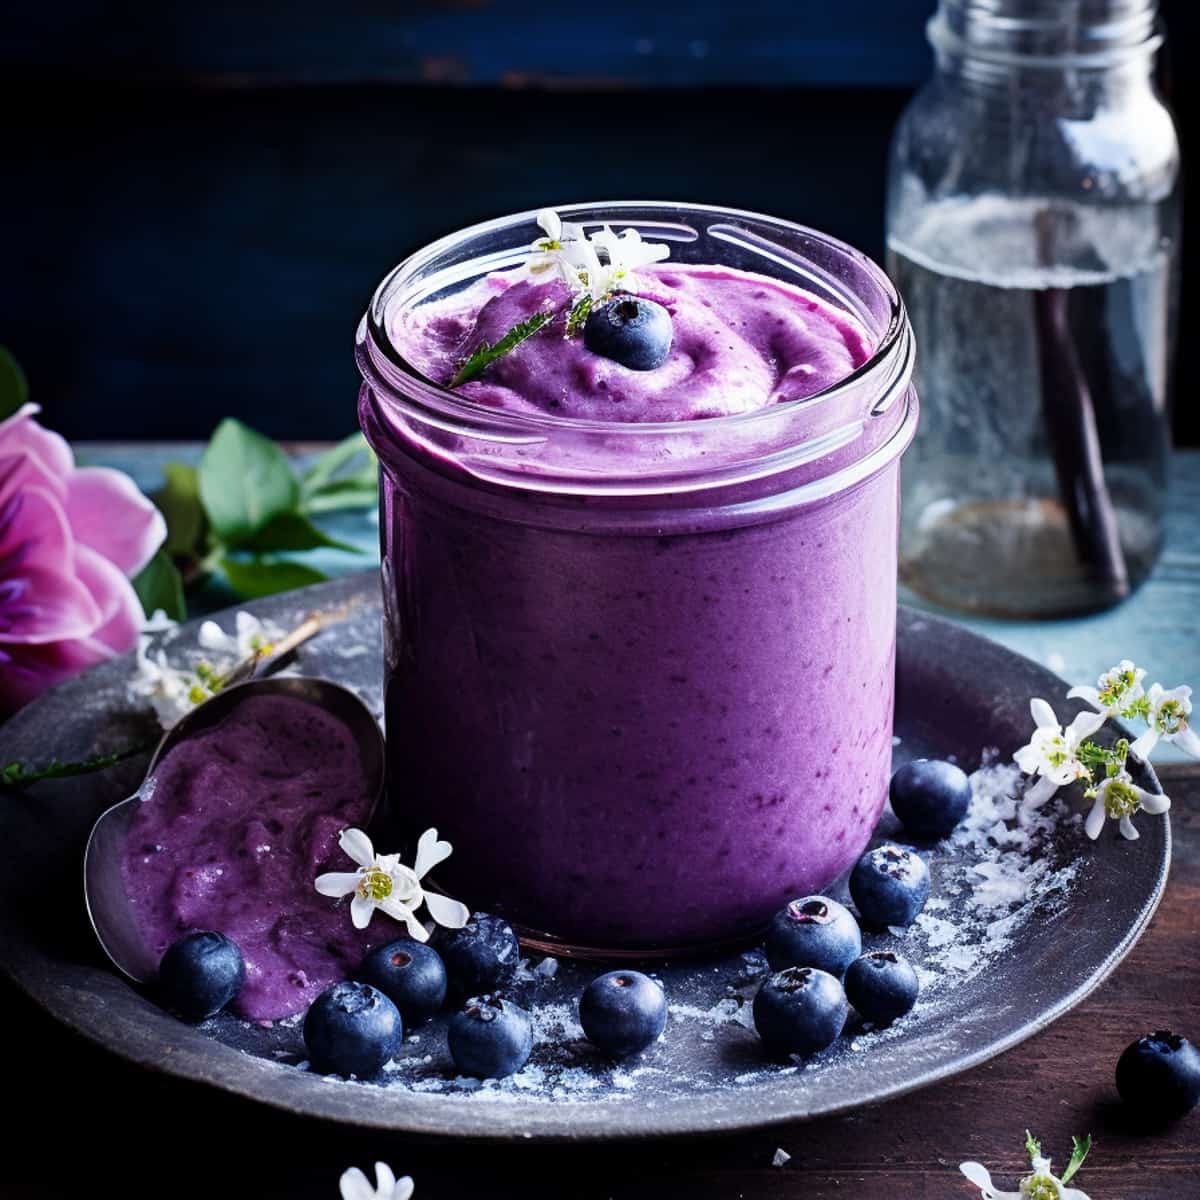 Blueberry curd in a glass jar.